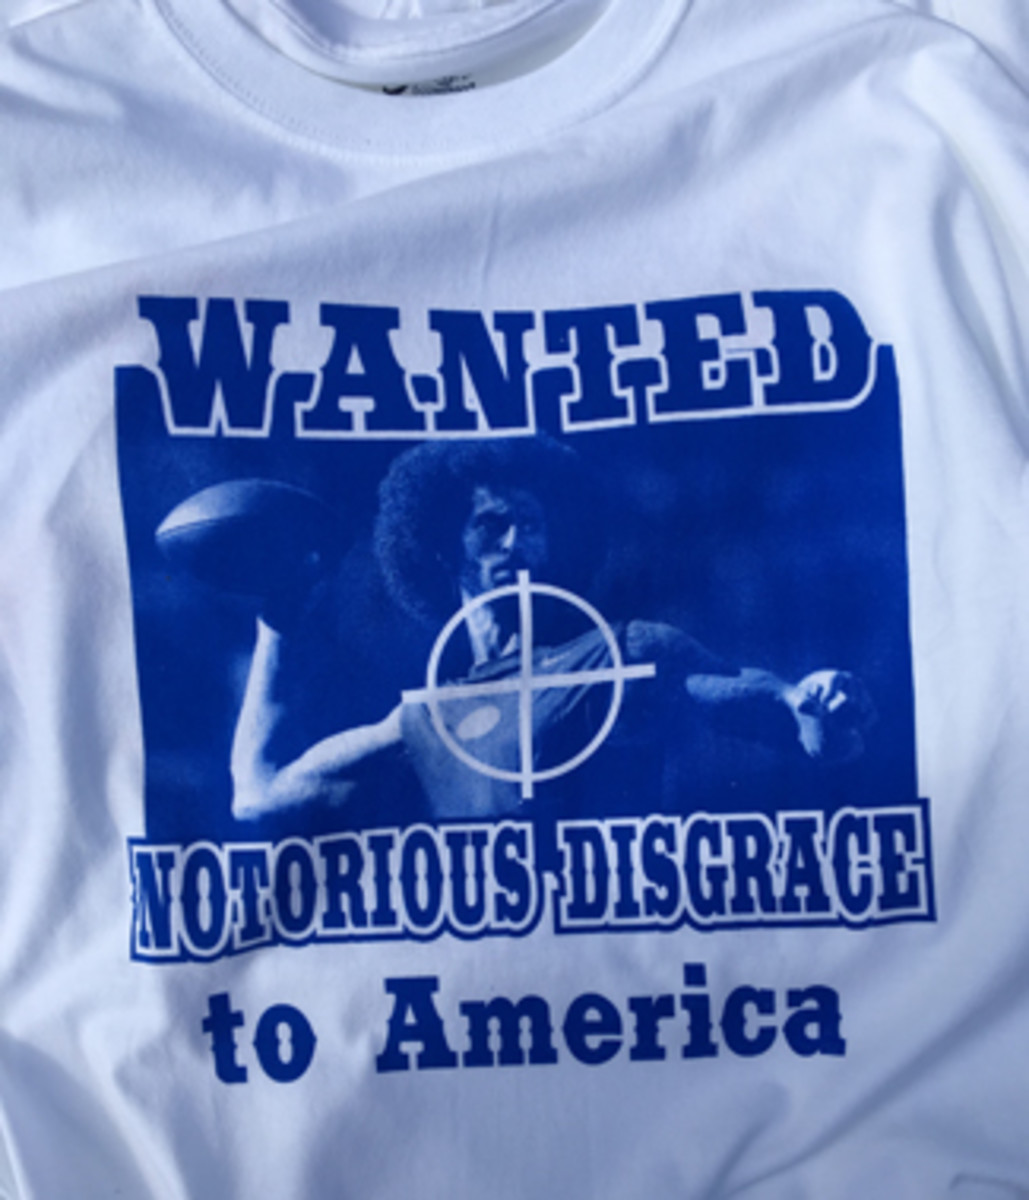 A T-shirt being sold outside the stadium.